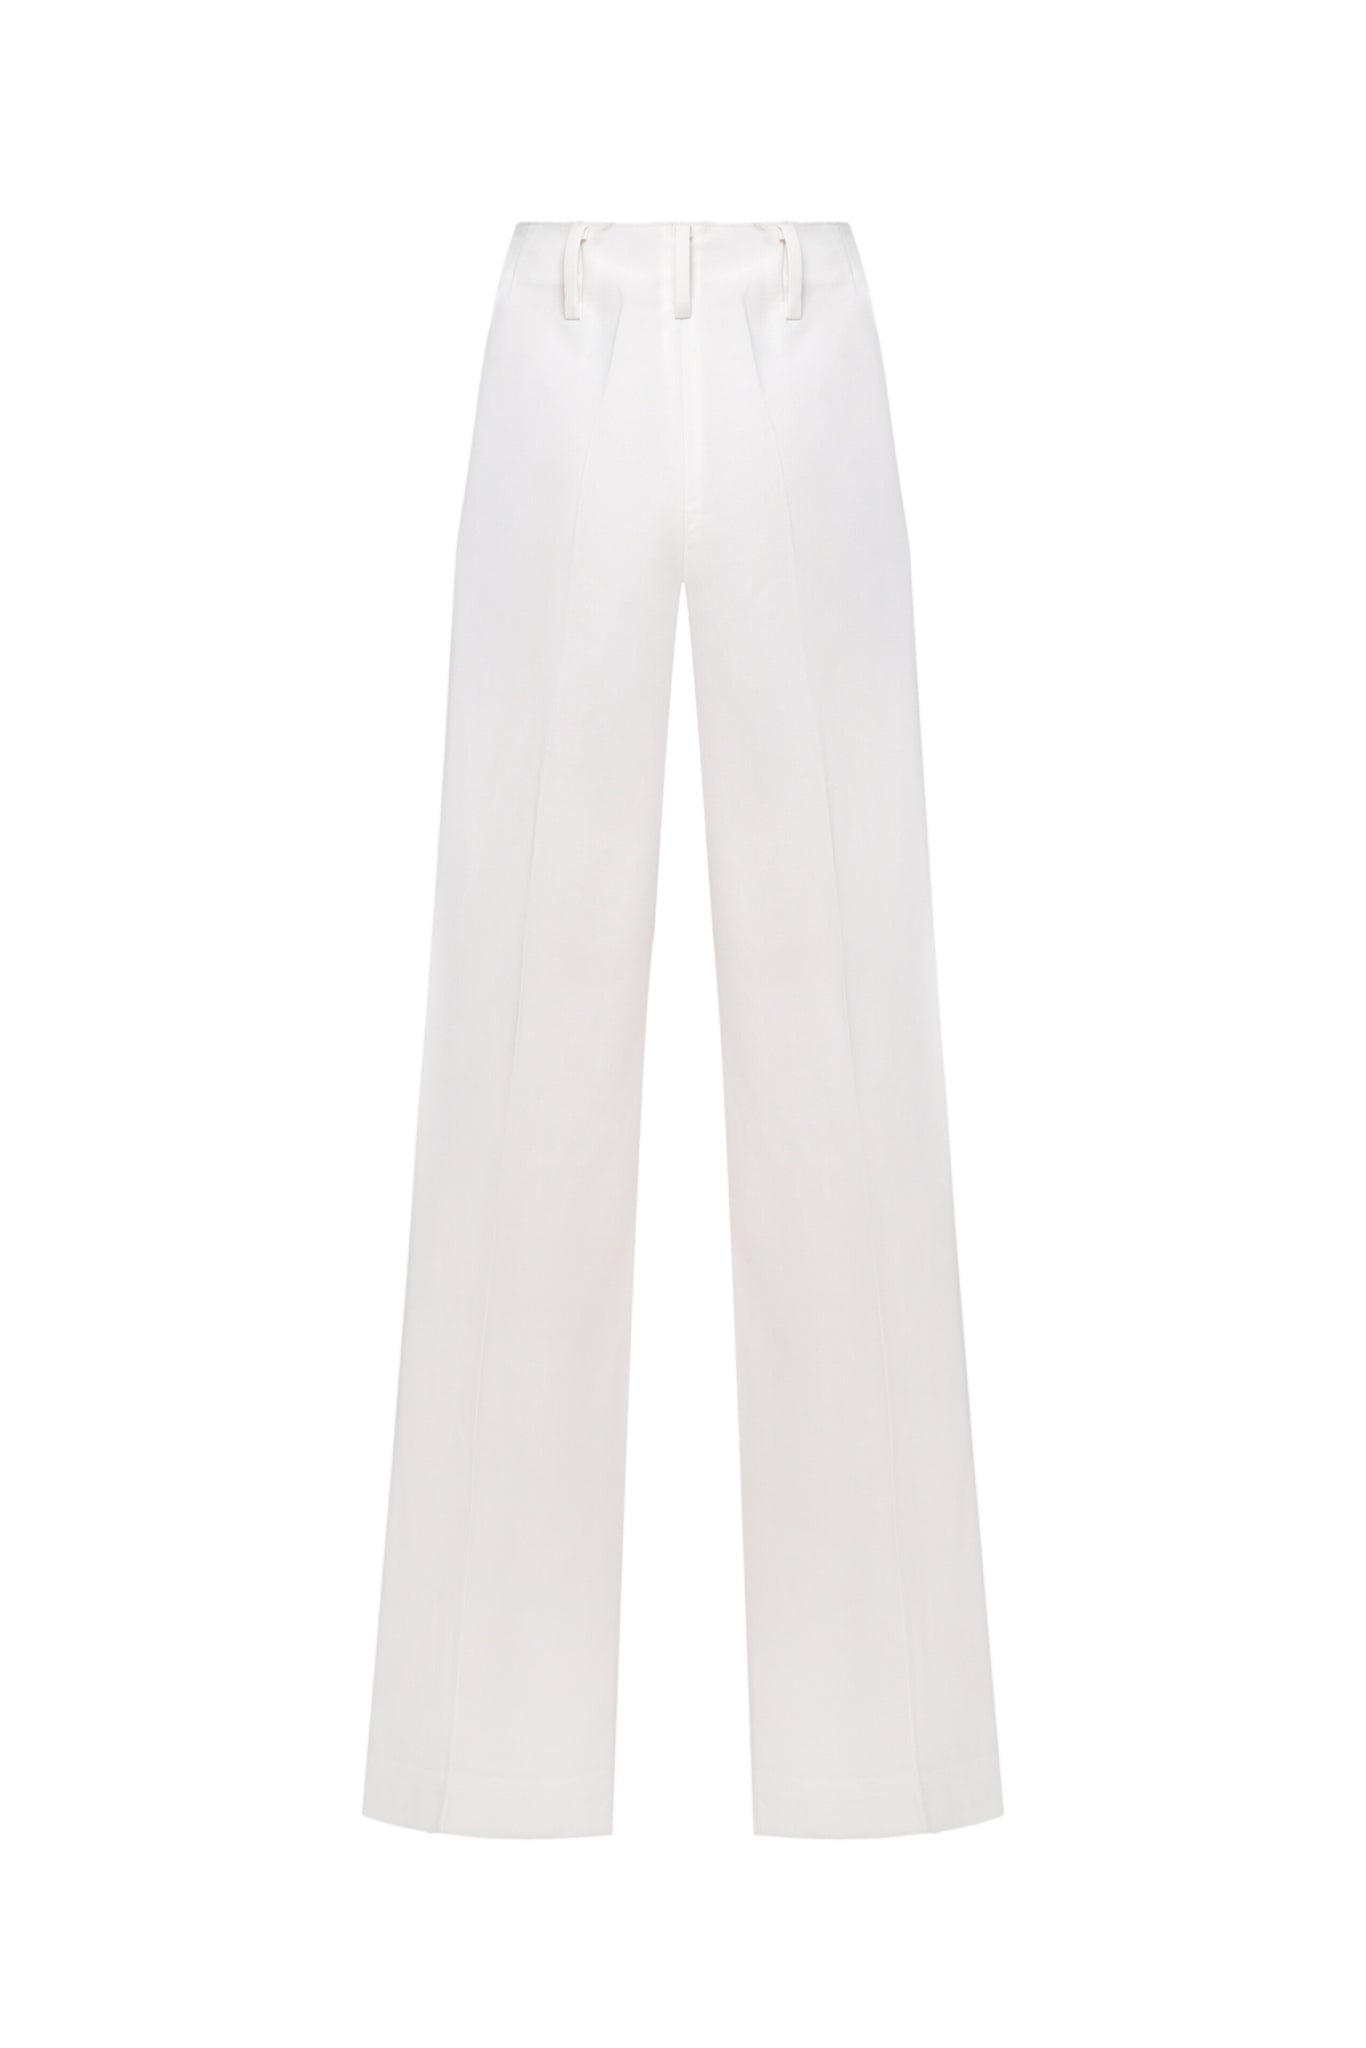 White trousers with black piping